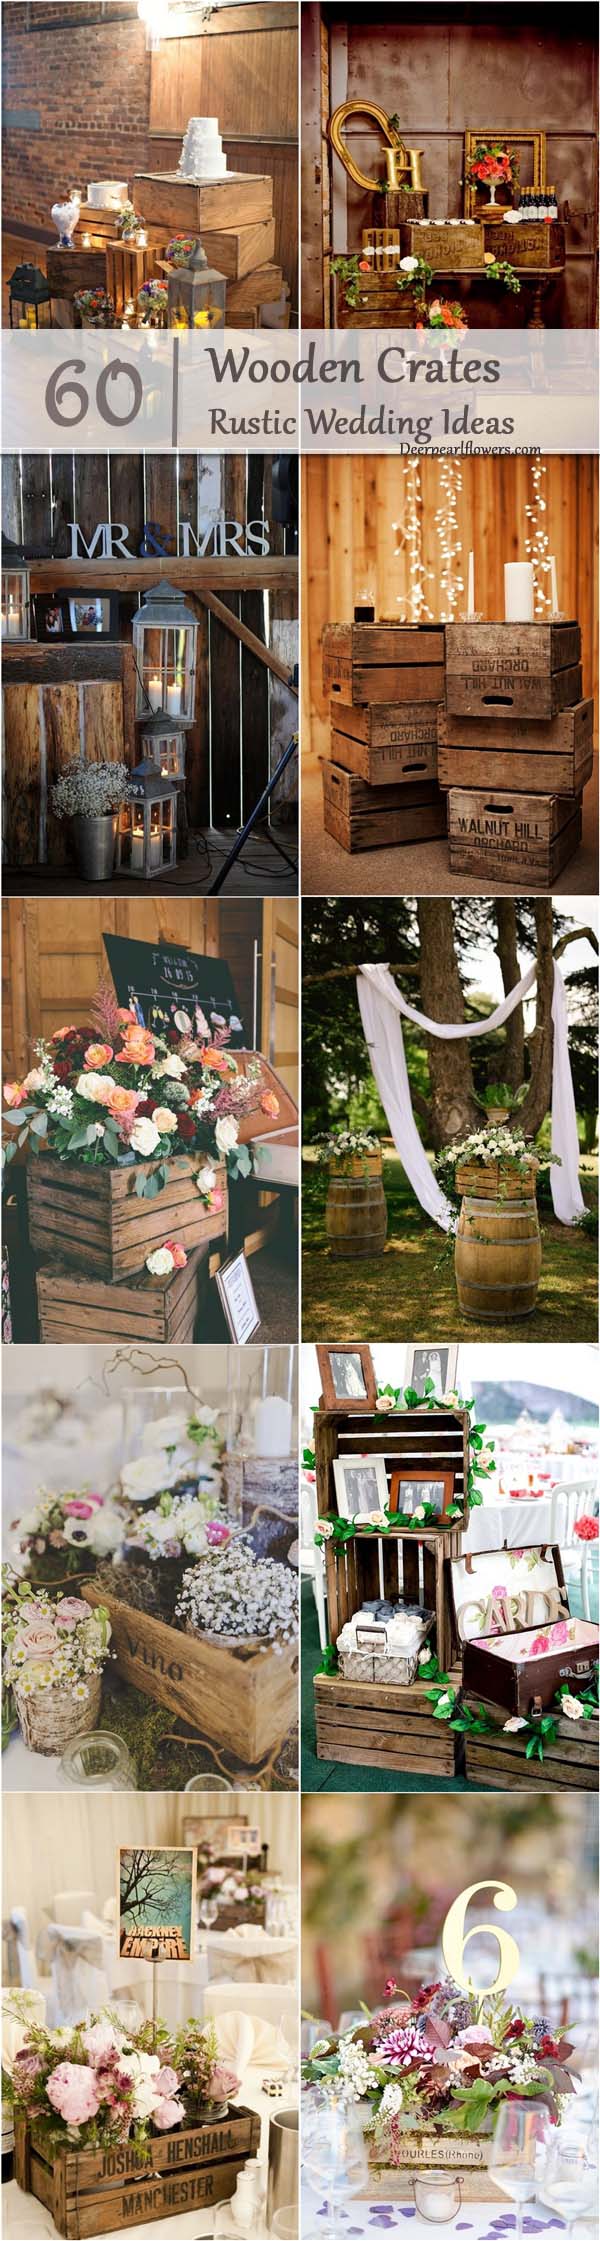 rustic country wooden crates wedding theme ideas